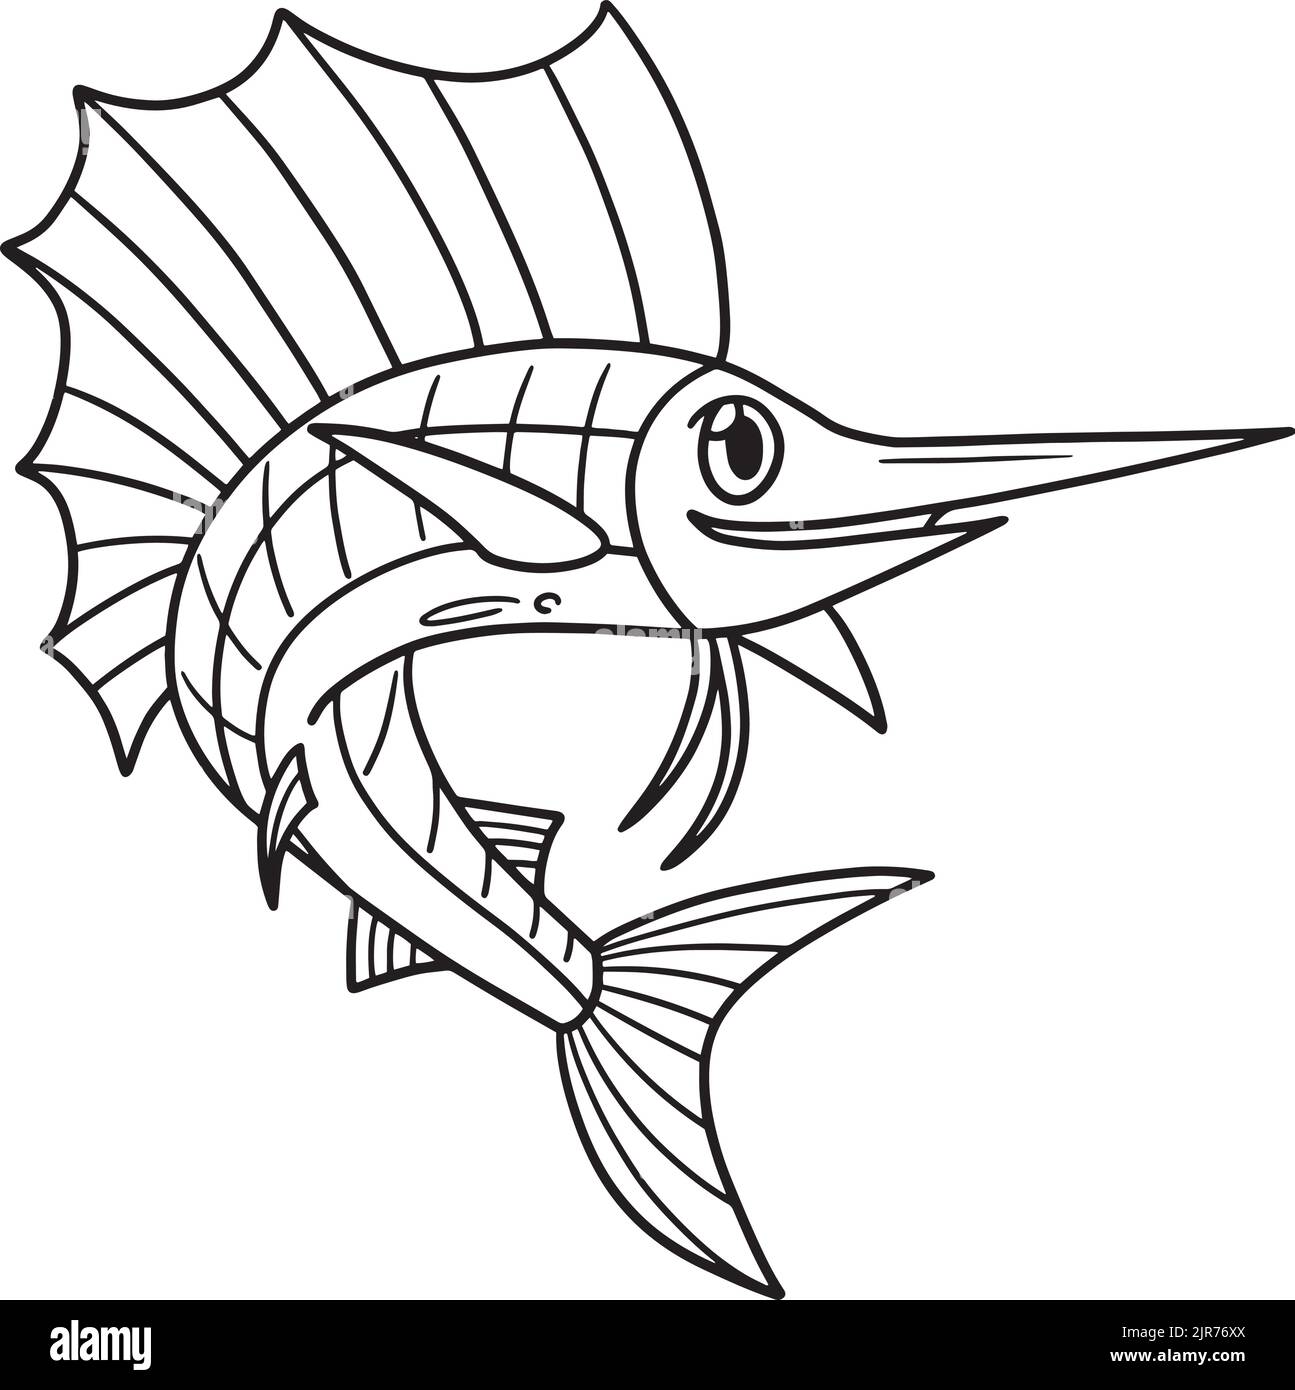 Sail Fish Isolated Coloring Page for Kids Stock Vector